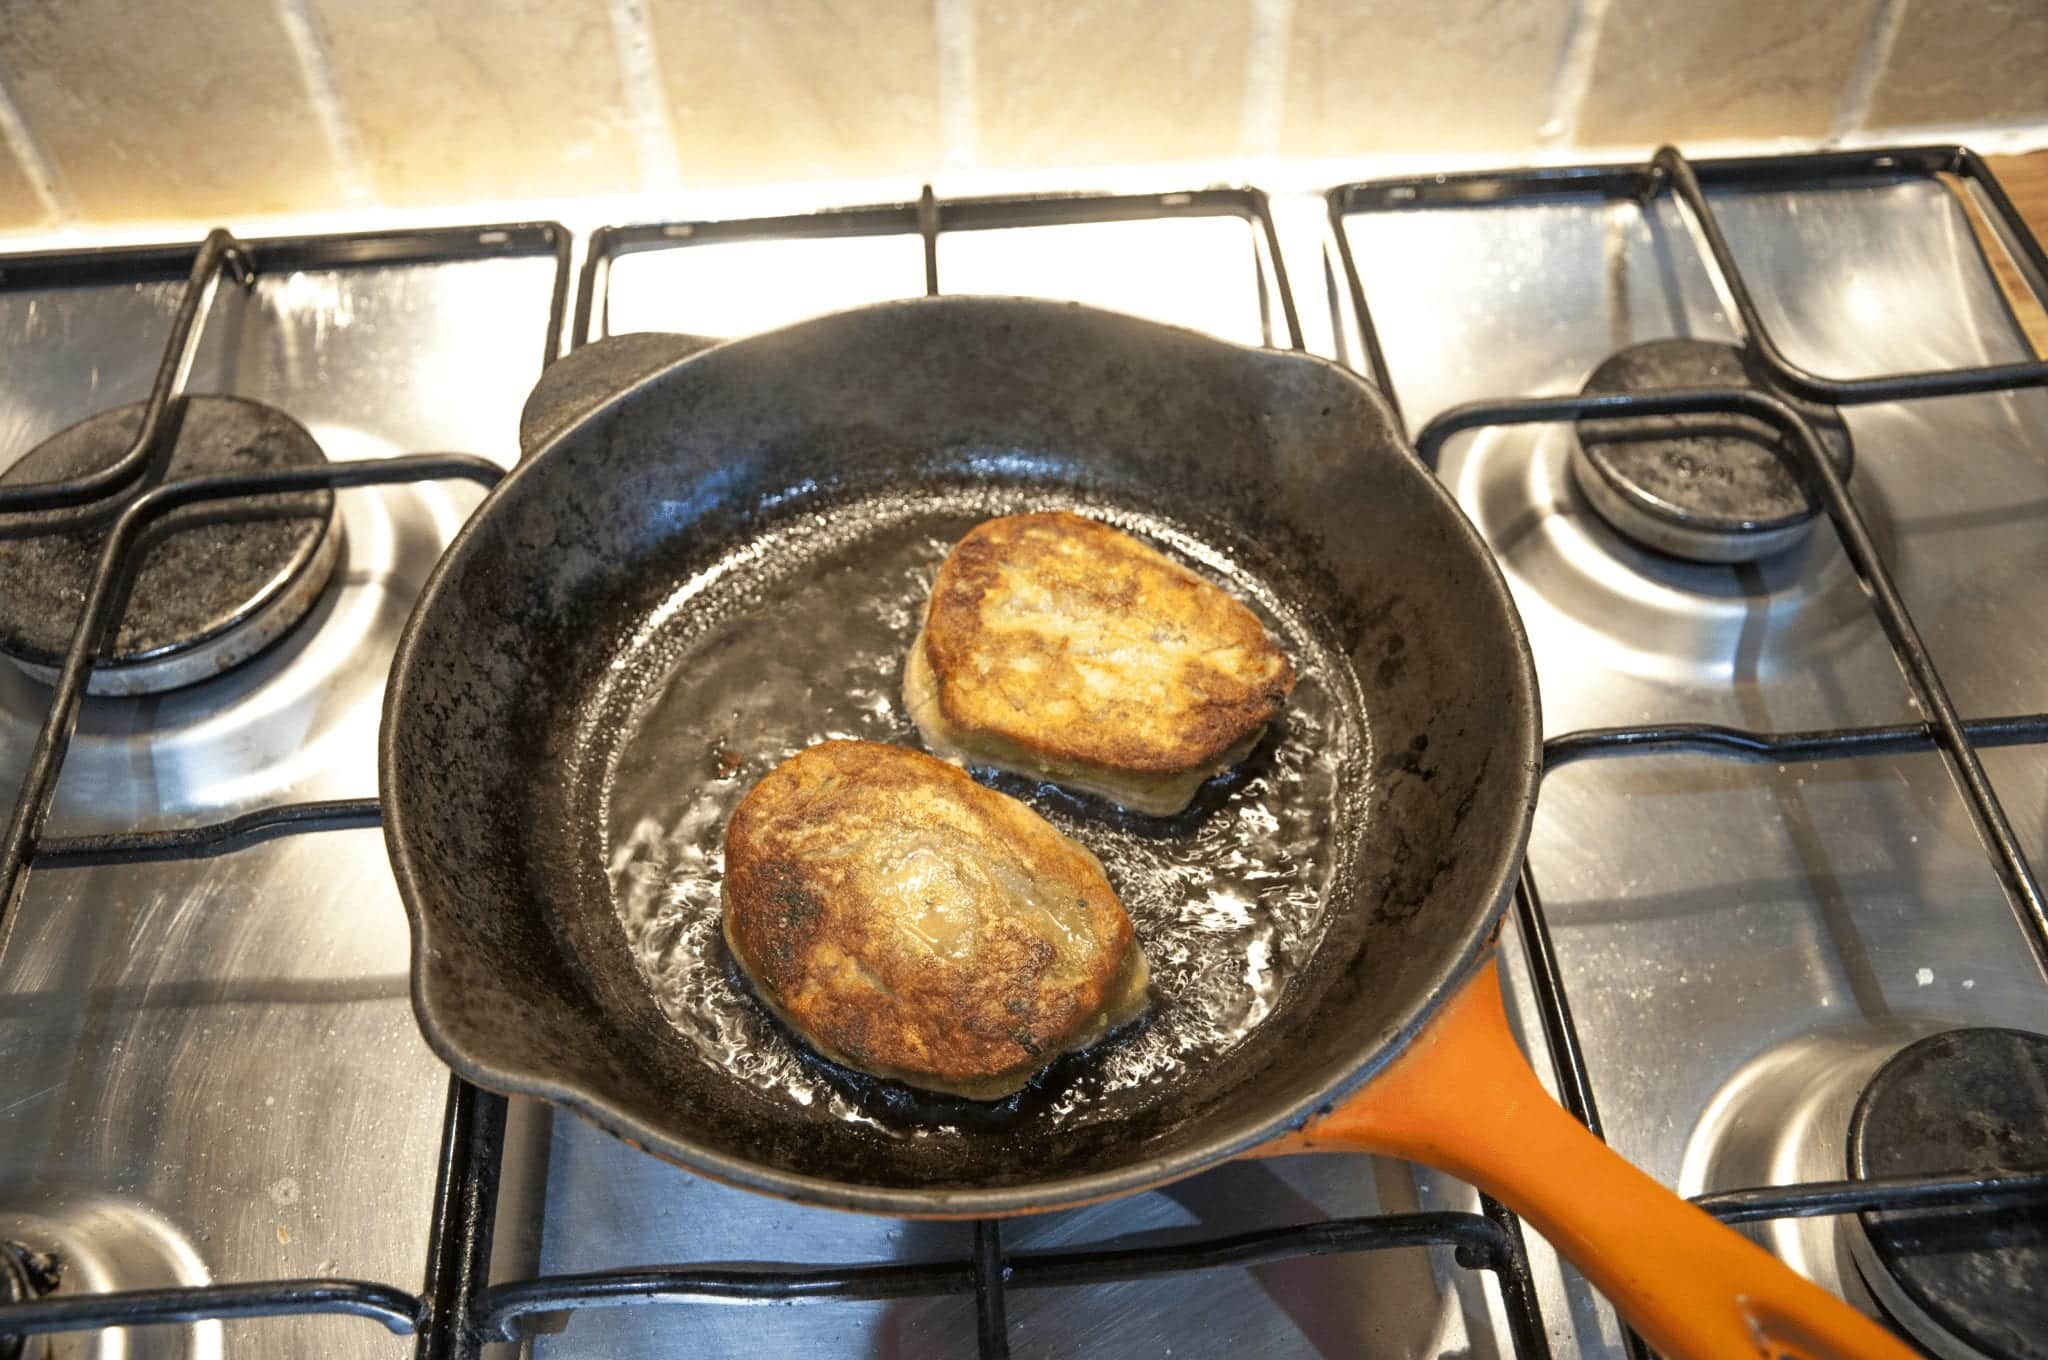 Pan-fry for 3 mins each side | https://theyumyumclub.com/2019/07/05/falafels-fit-for-the-pharaohs/